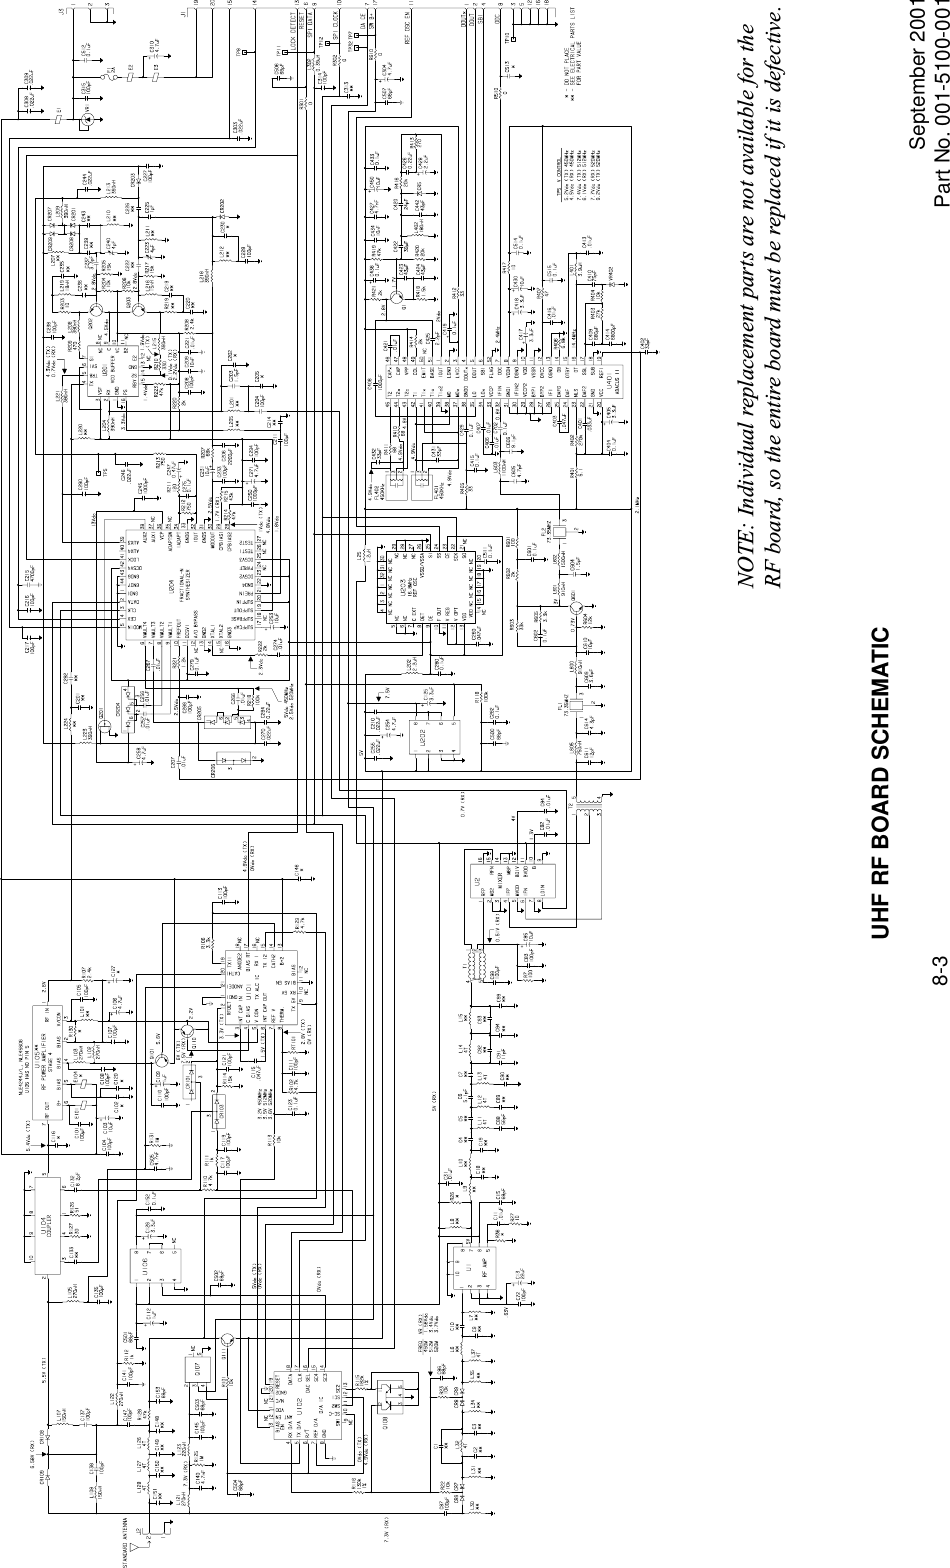 September 2001Part No. 001-5100-0018-3UHF RF BOARD SCHEMATICNOTE: Individual replacement parts are not available for the RF board, so the entire board must be replaced if it is defective.